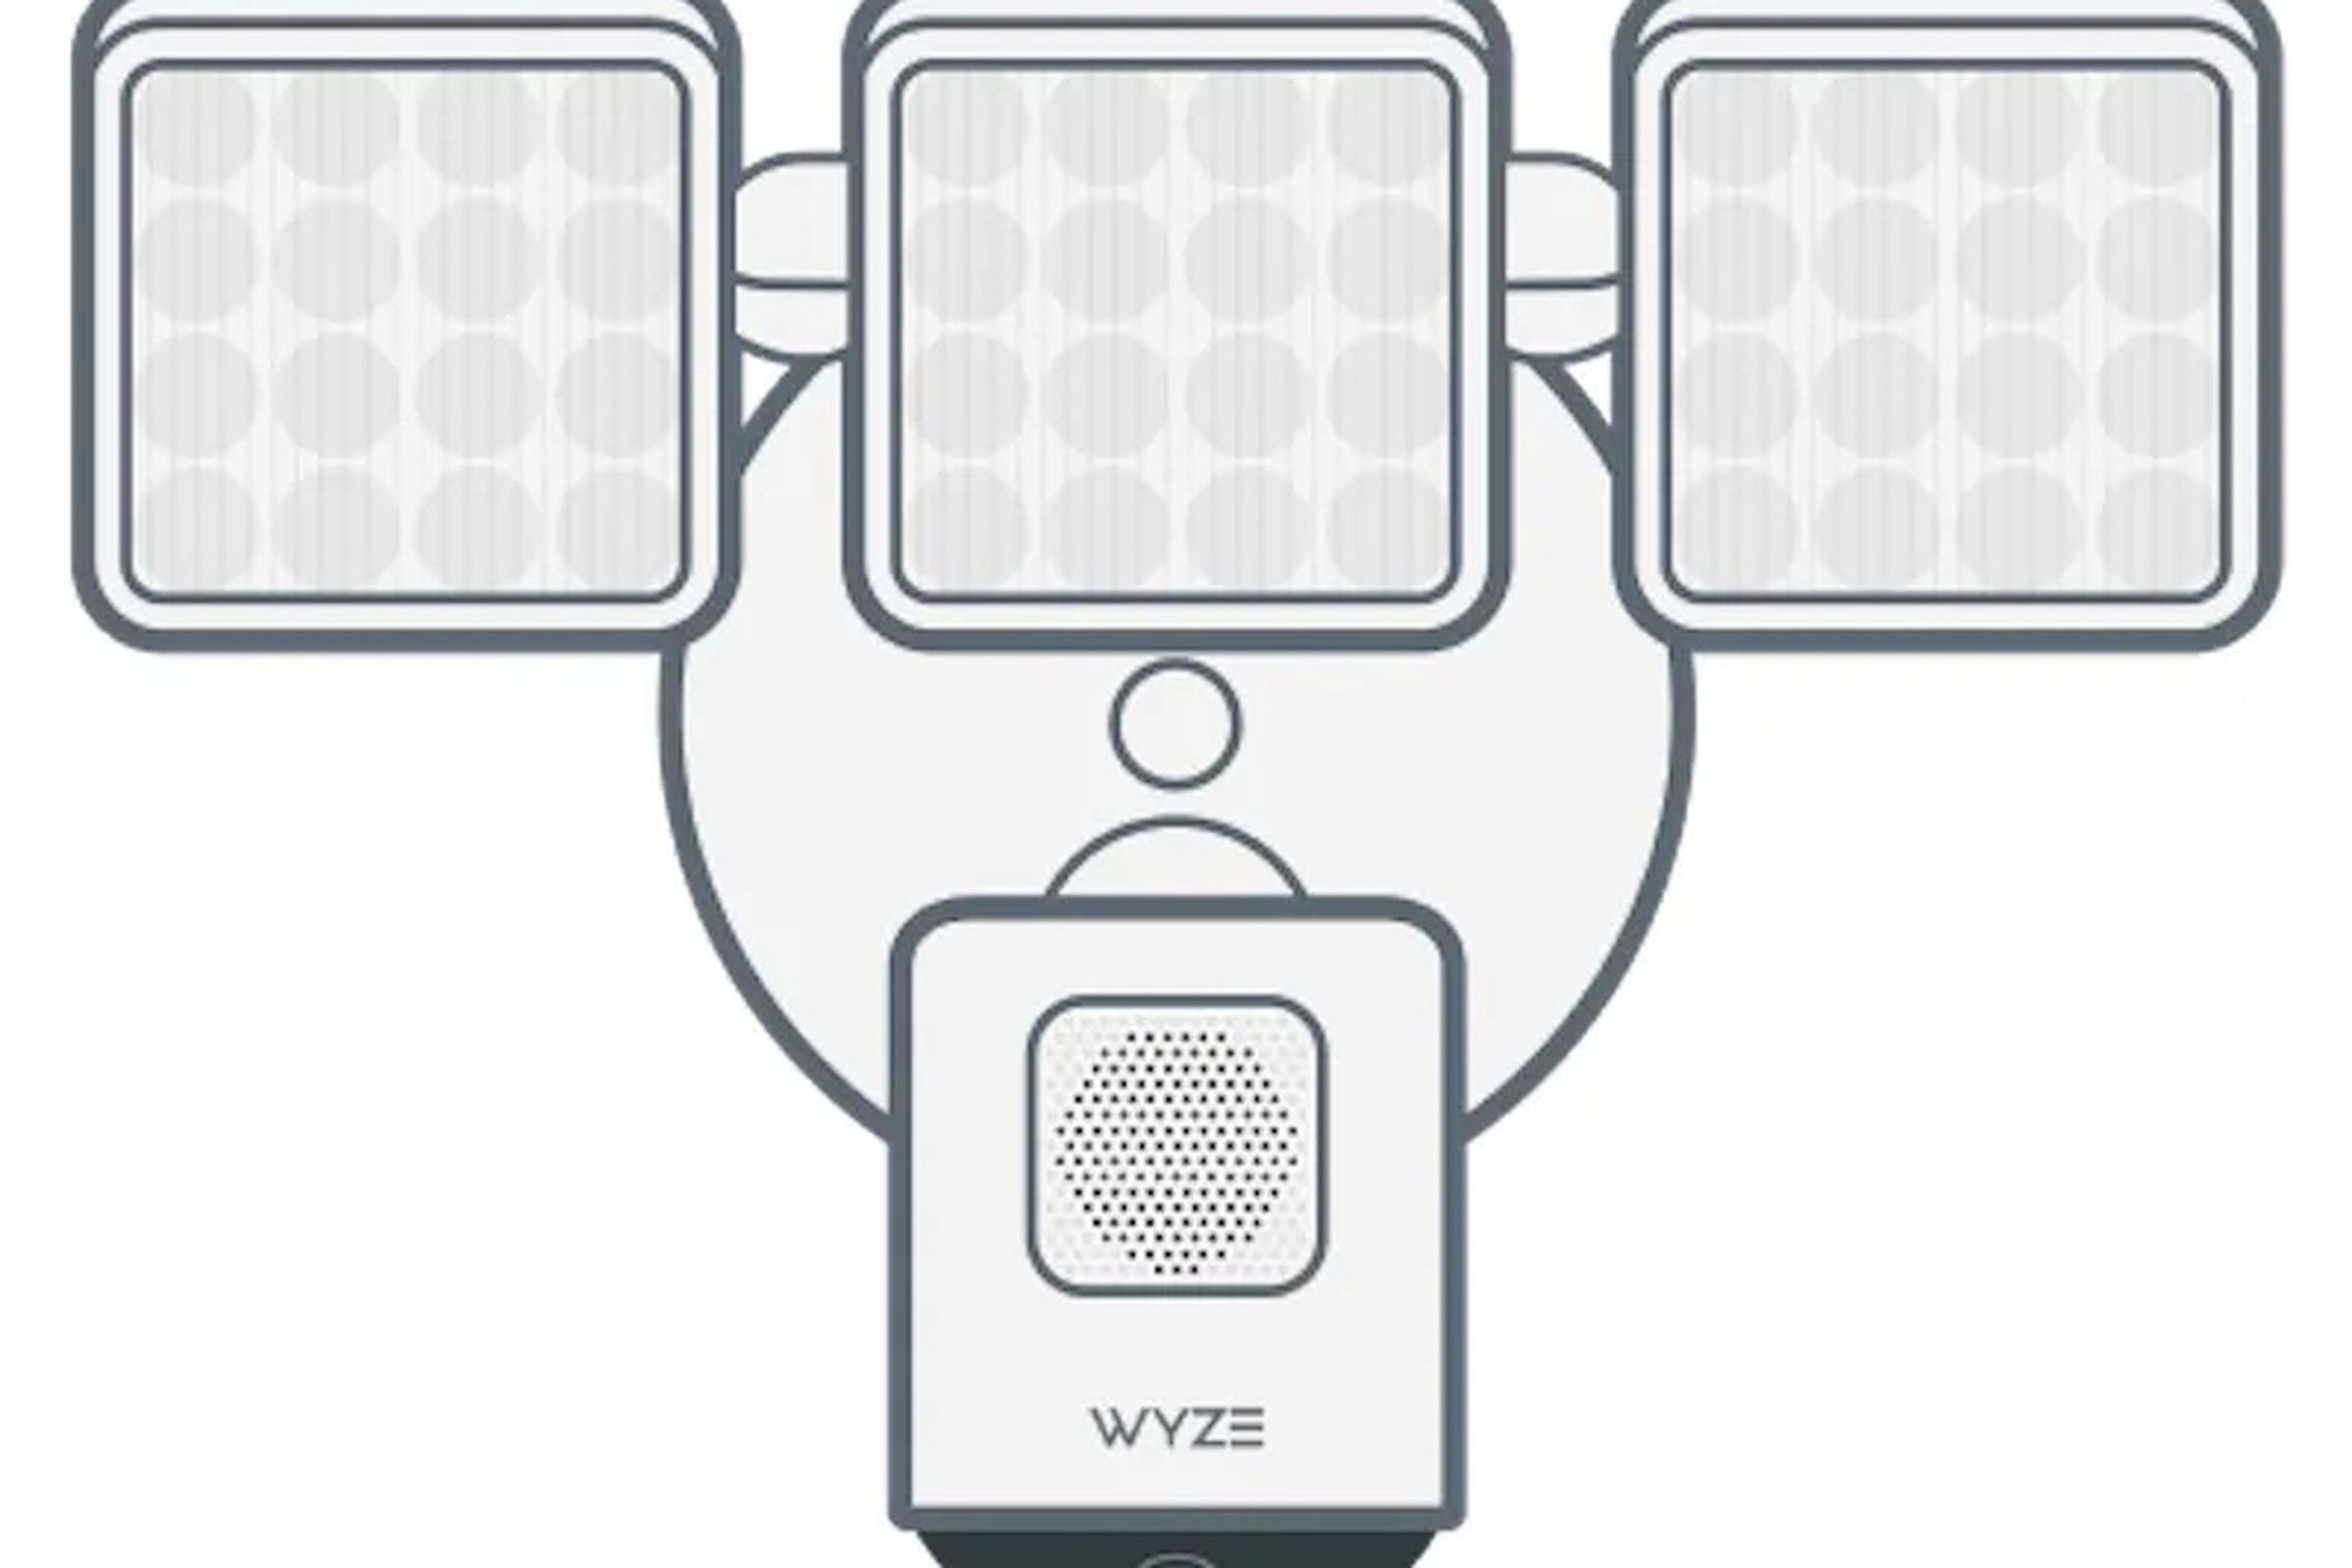 Technologist Dave Zatz has discovered some clues about new Wyze security cameras.